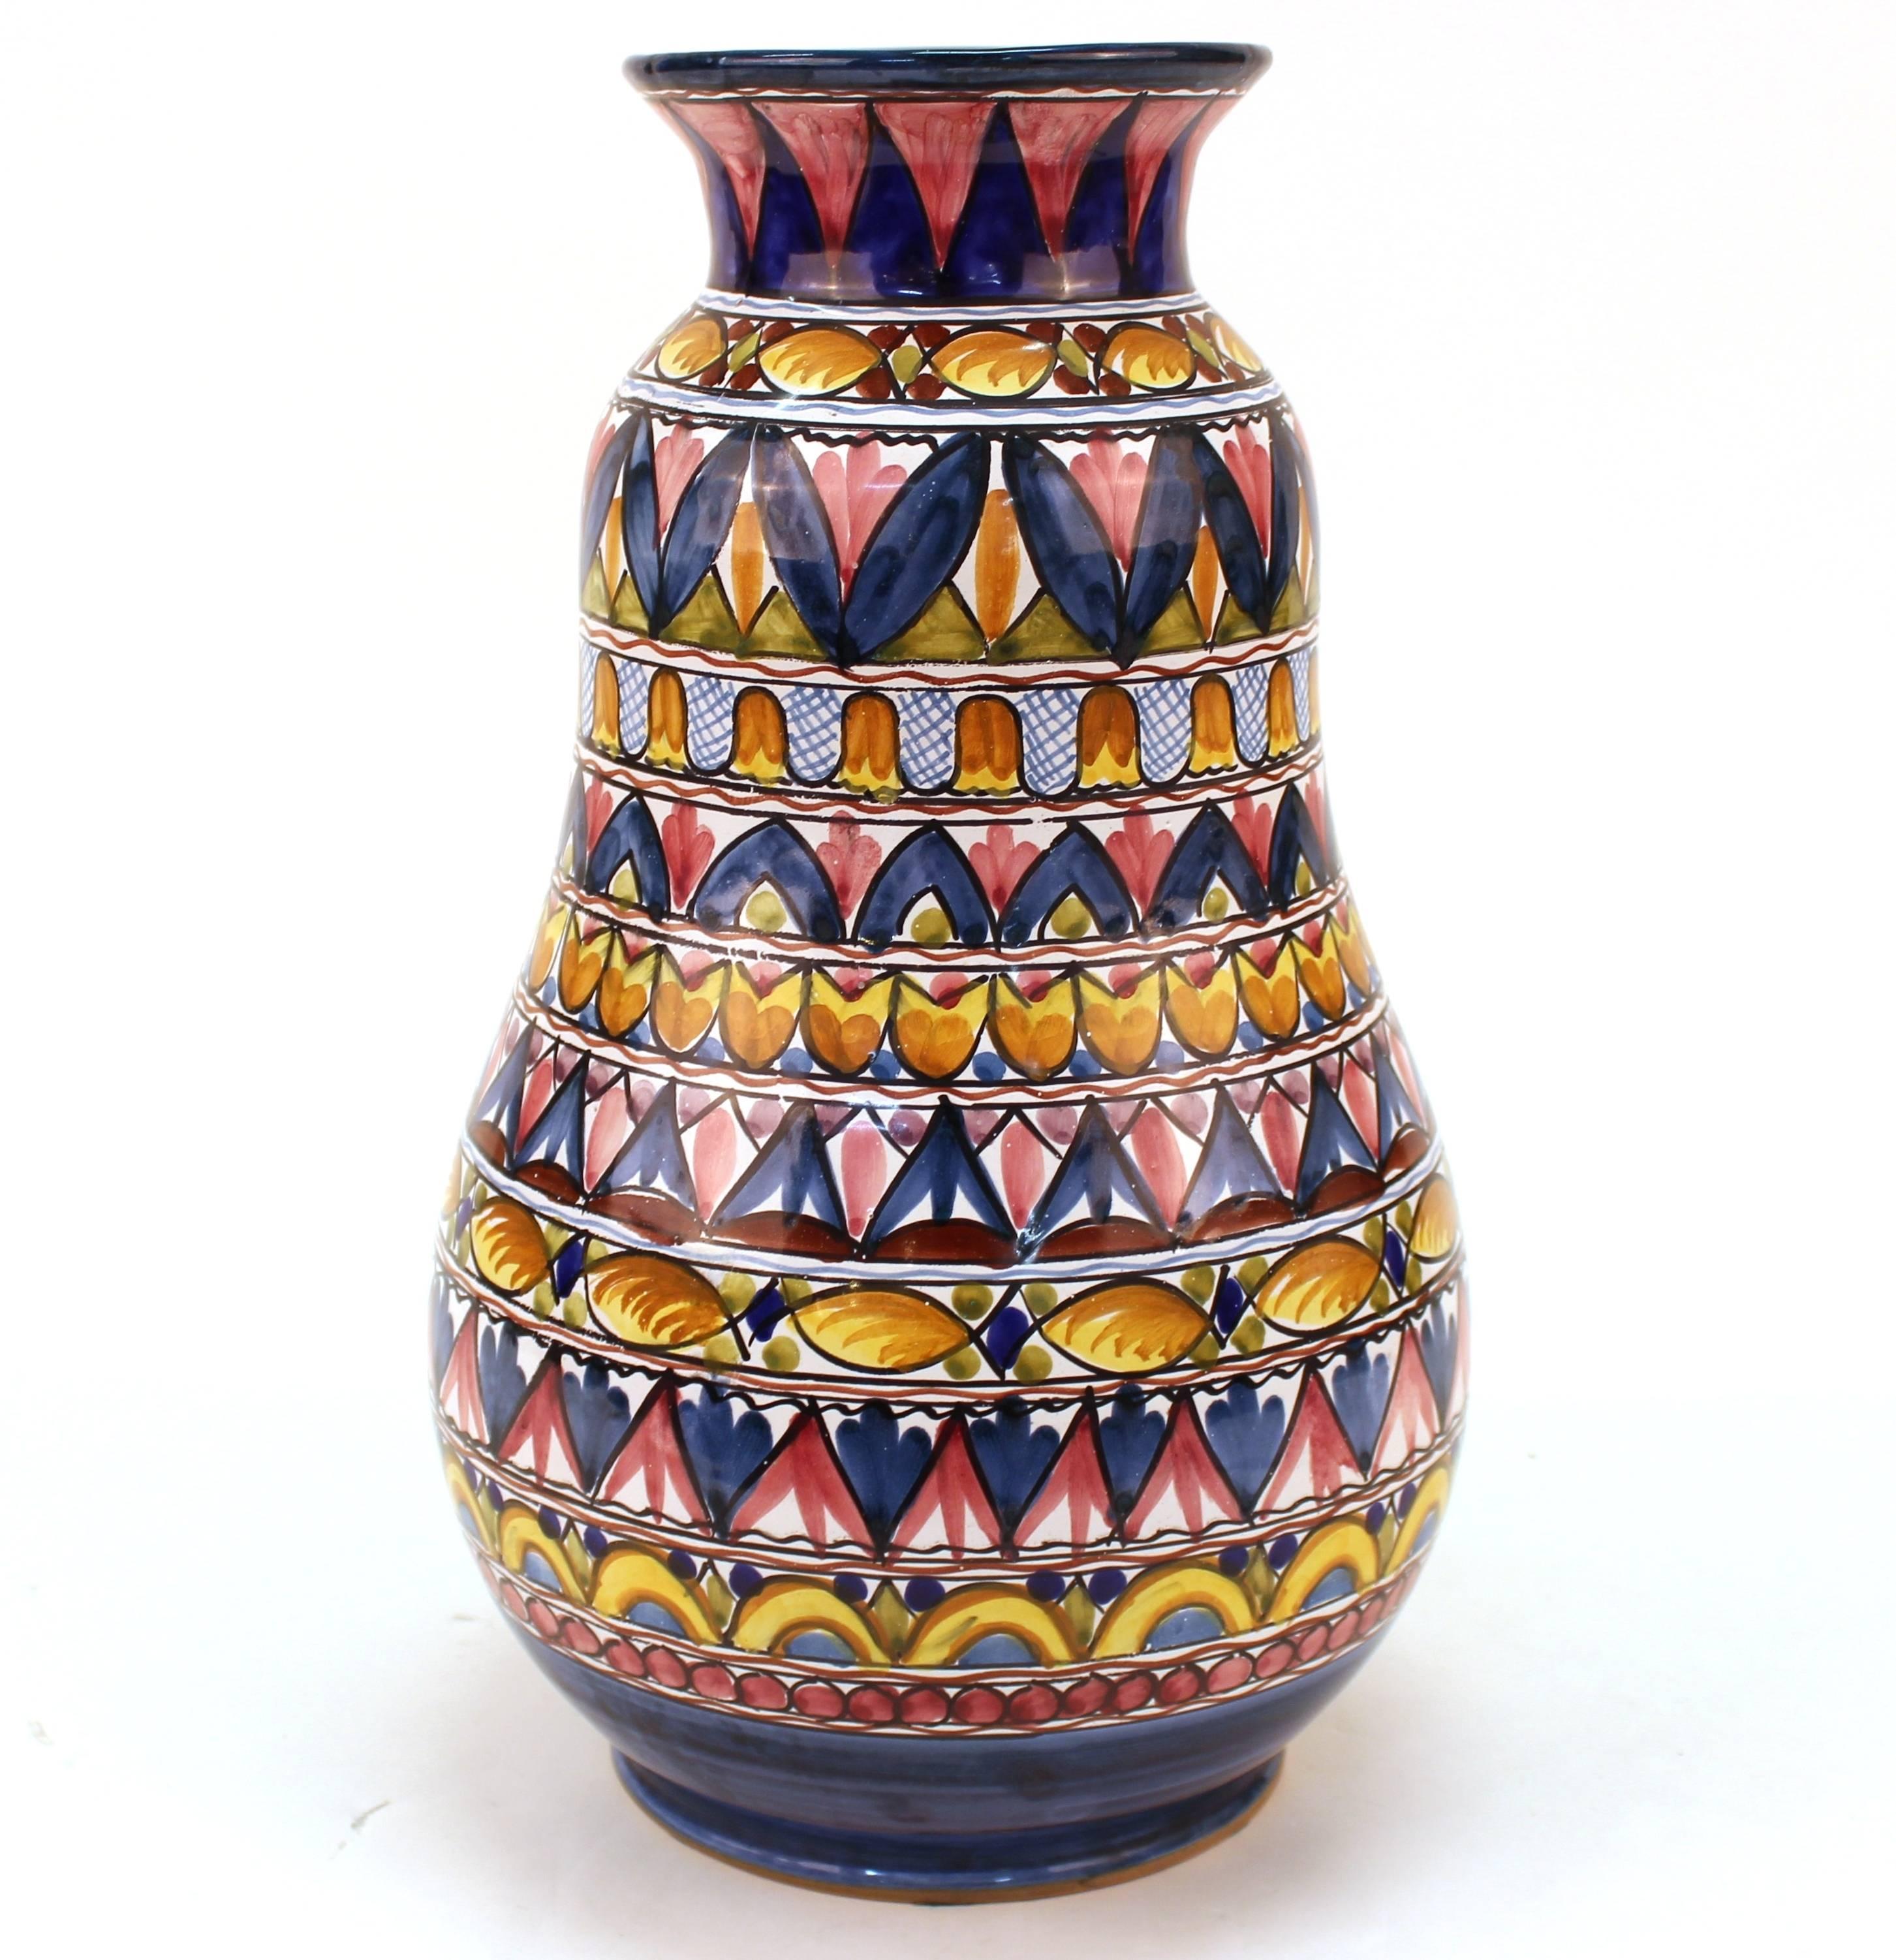 An Italian earthenware pottery vase with rows of colorful geometric designs, signed on the bottom 'De Marinis Vietri'. The piece is in great vintage condition.